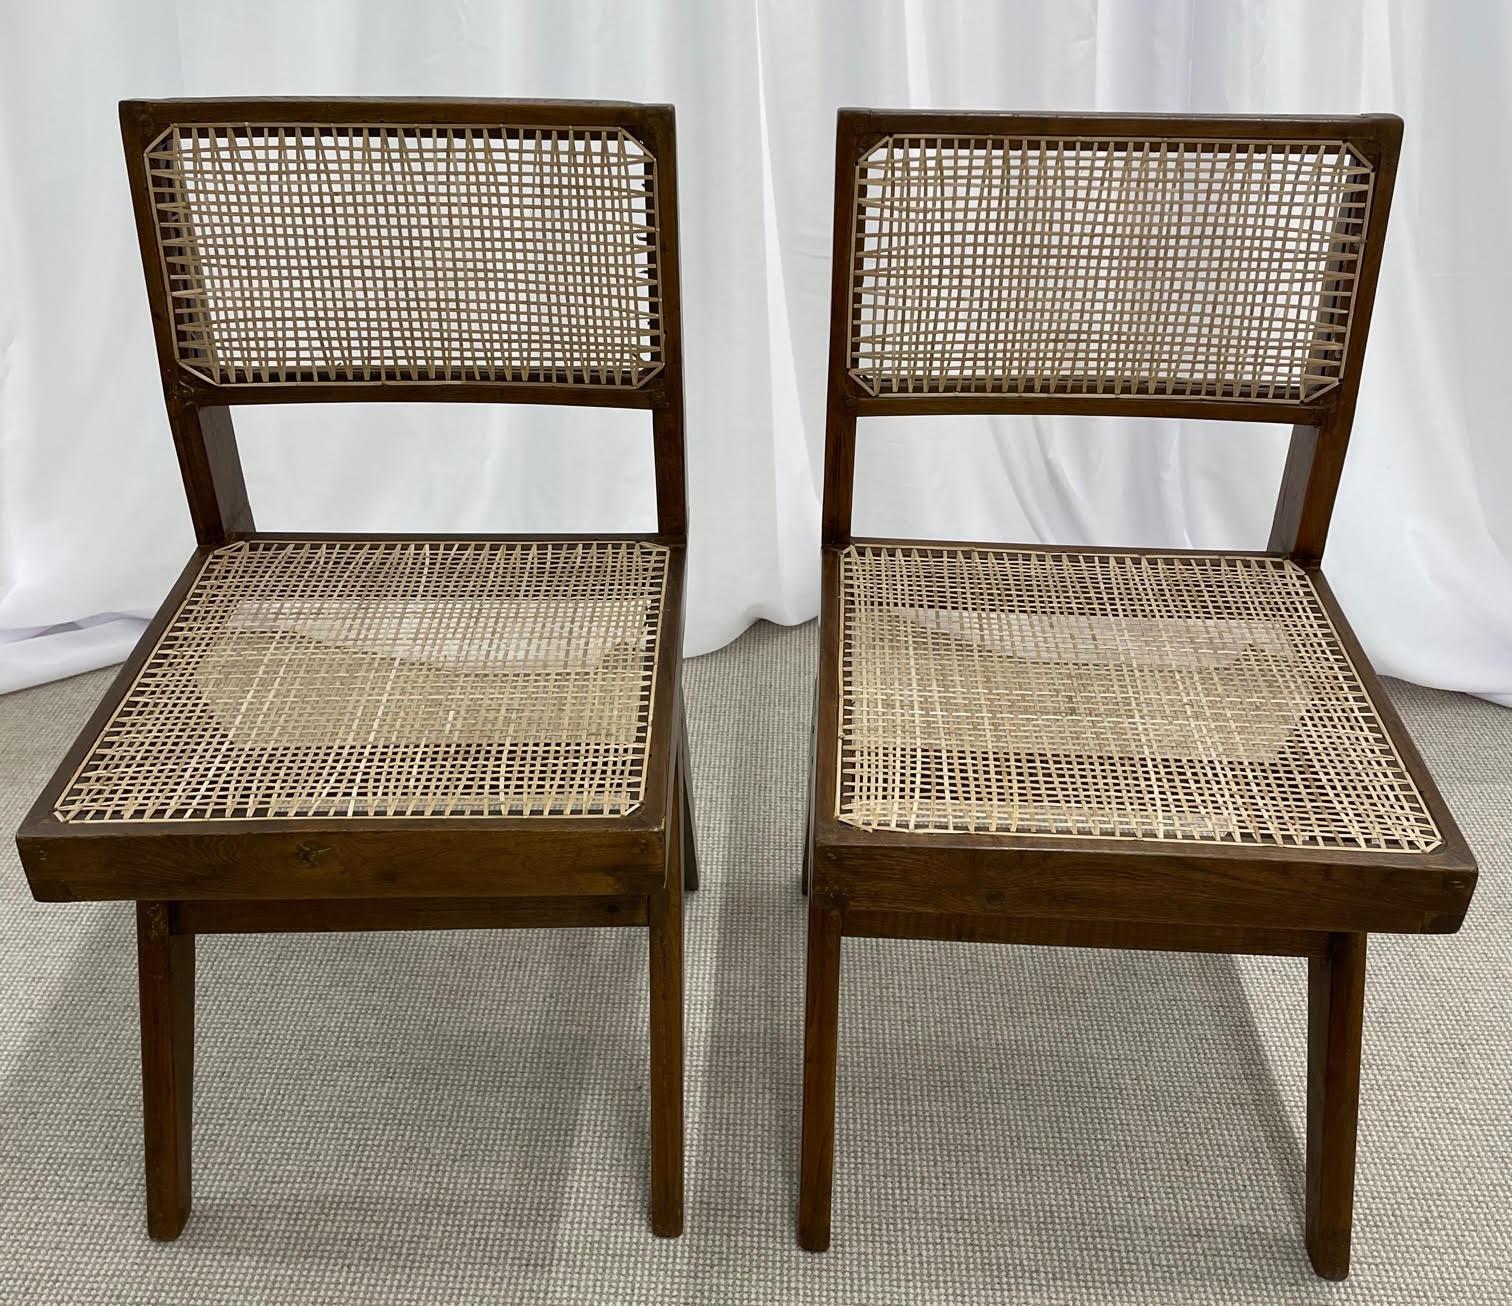 Pair of Mid-Century Modern Pierre Jeanneret Armless Dining Chairs, Teak, Cane 1